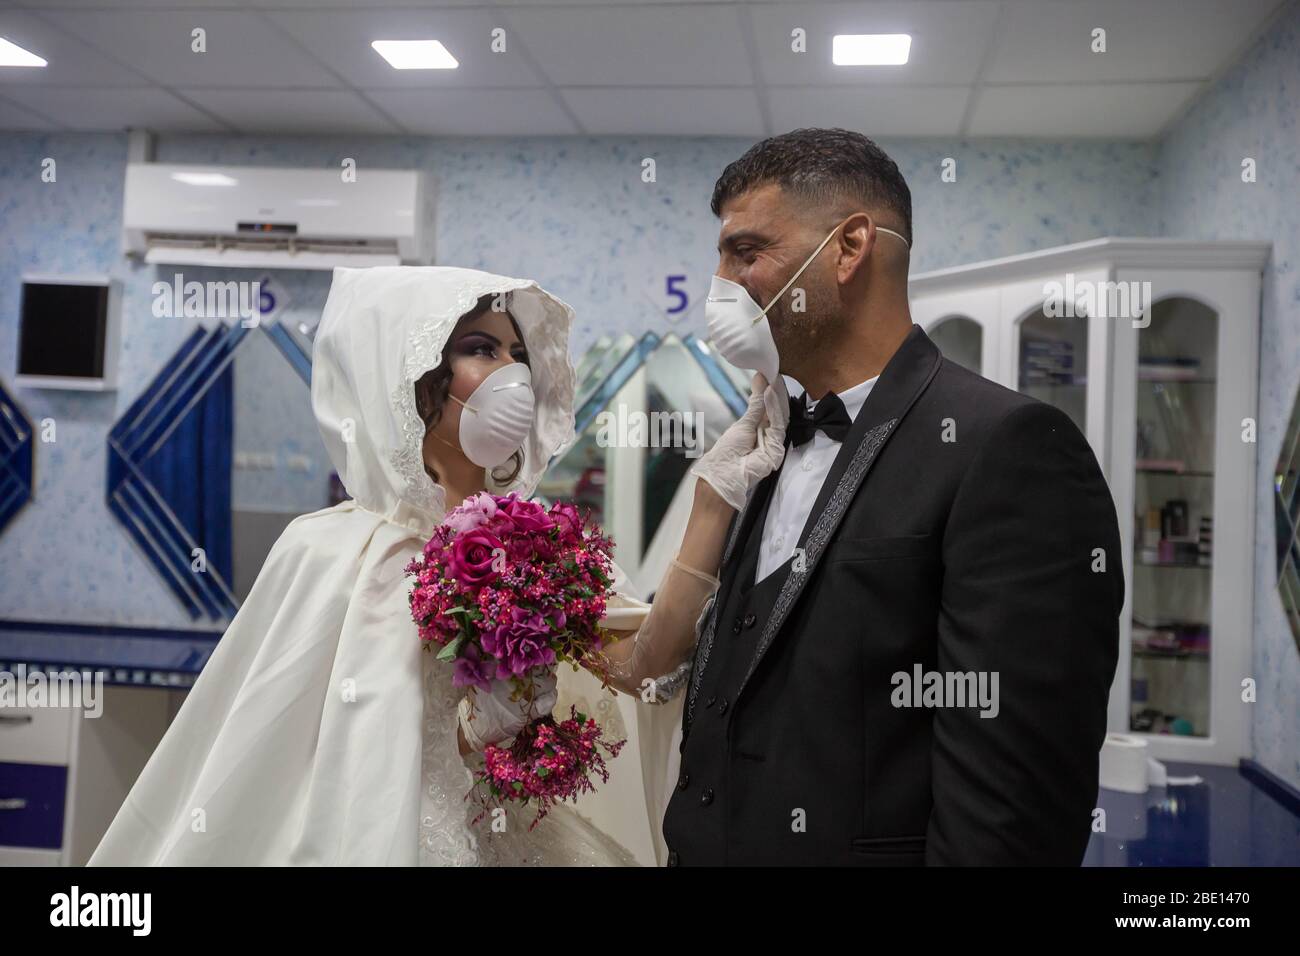 Beijing, Palestinian Deheisheh refugee camp near the West Bank city of Bethlehem. 10th Apr, 2020. Palestinian bride, Shima' al-Titi, adjusts the face mask for her groom, Ishaq Musleh, before they leave the beauty salon in the Palestinian Deheisheh refugee camp near the West Bank city of Bethlehem, on April 10, 2020. Credit: Luay Sababa/Xinhua/Alamy Live News Stock Photo